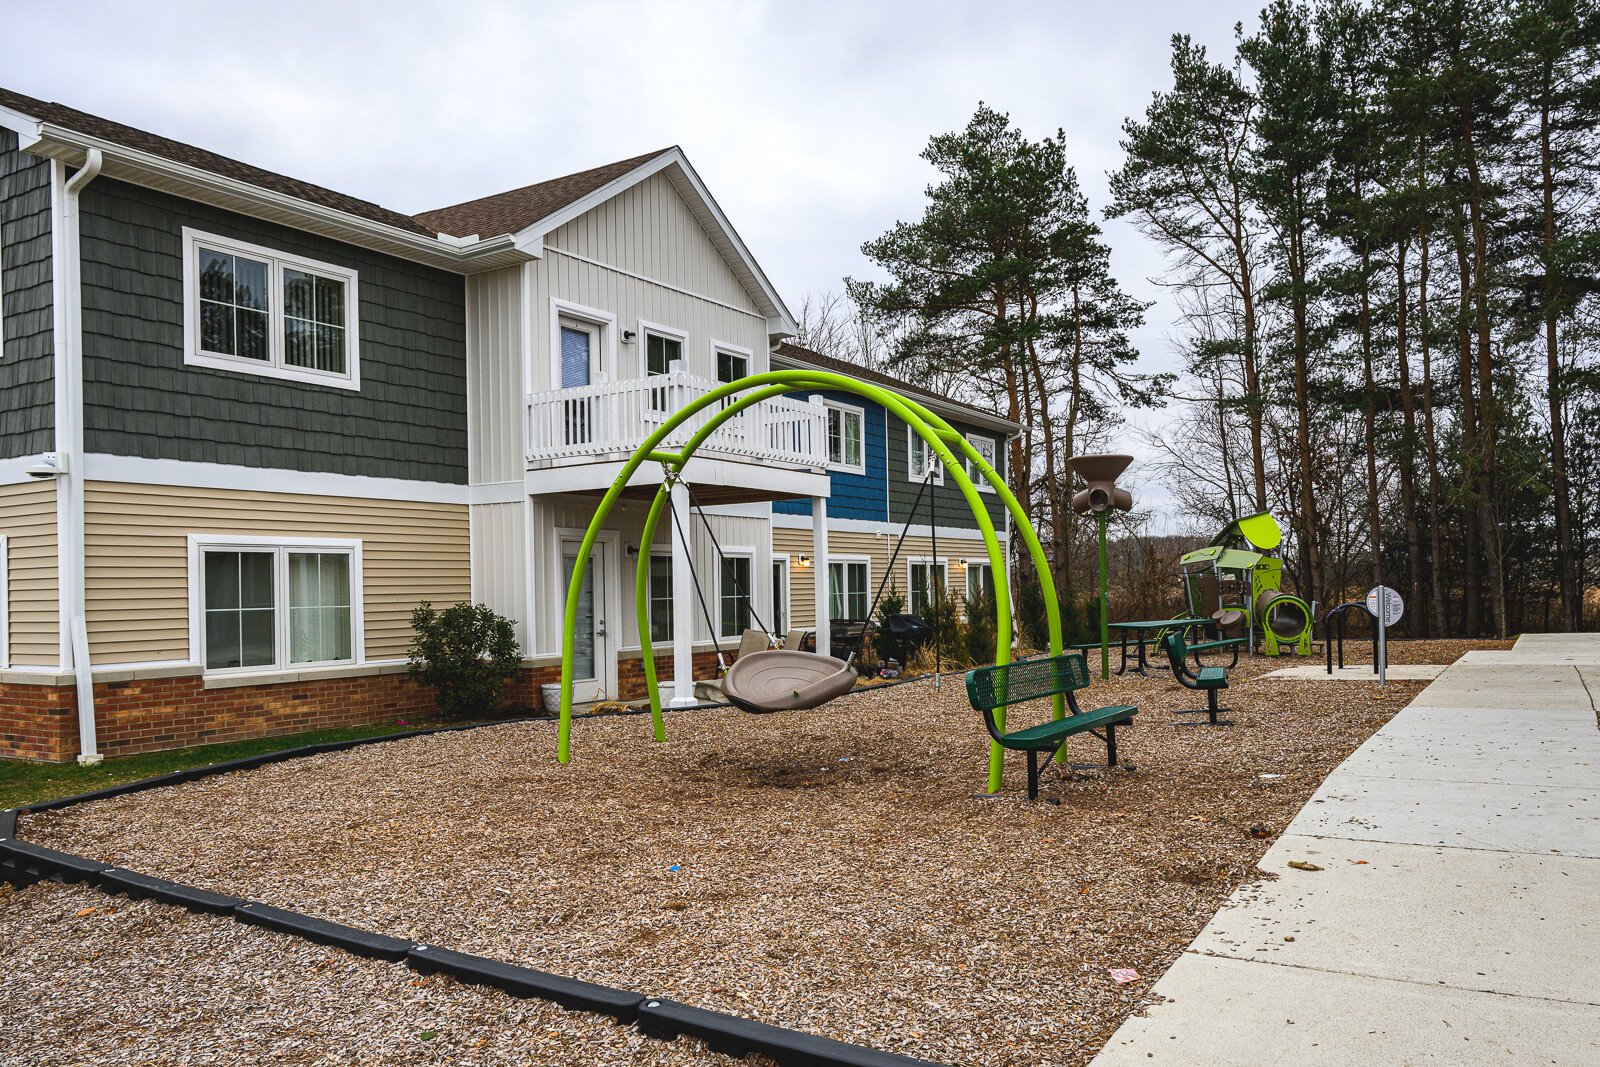 Hilltop View Apartments' playground.